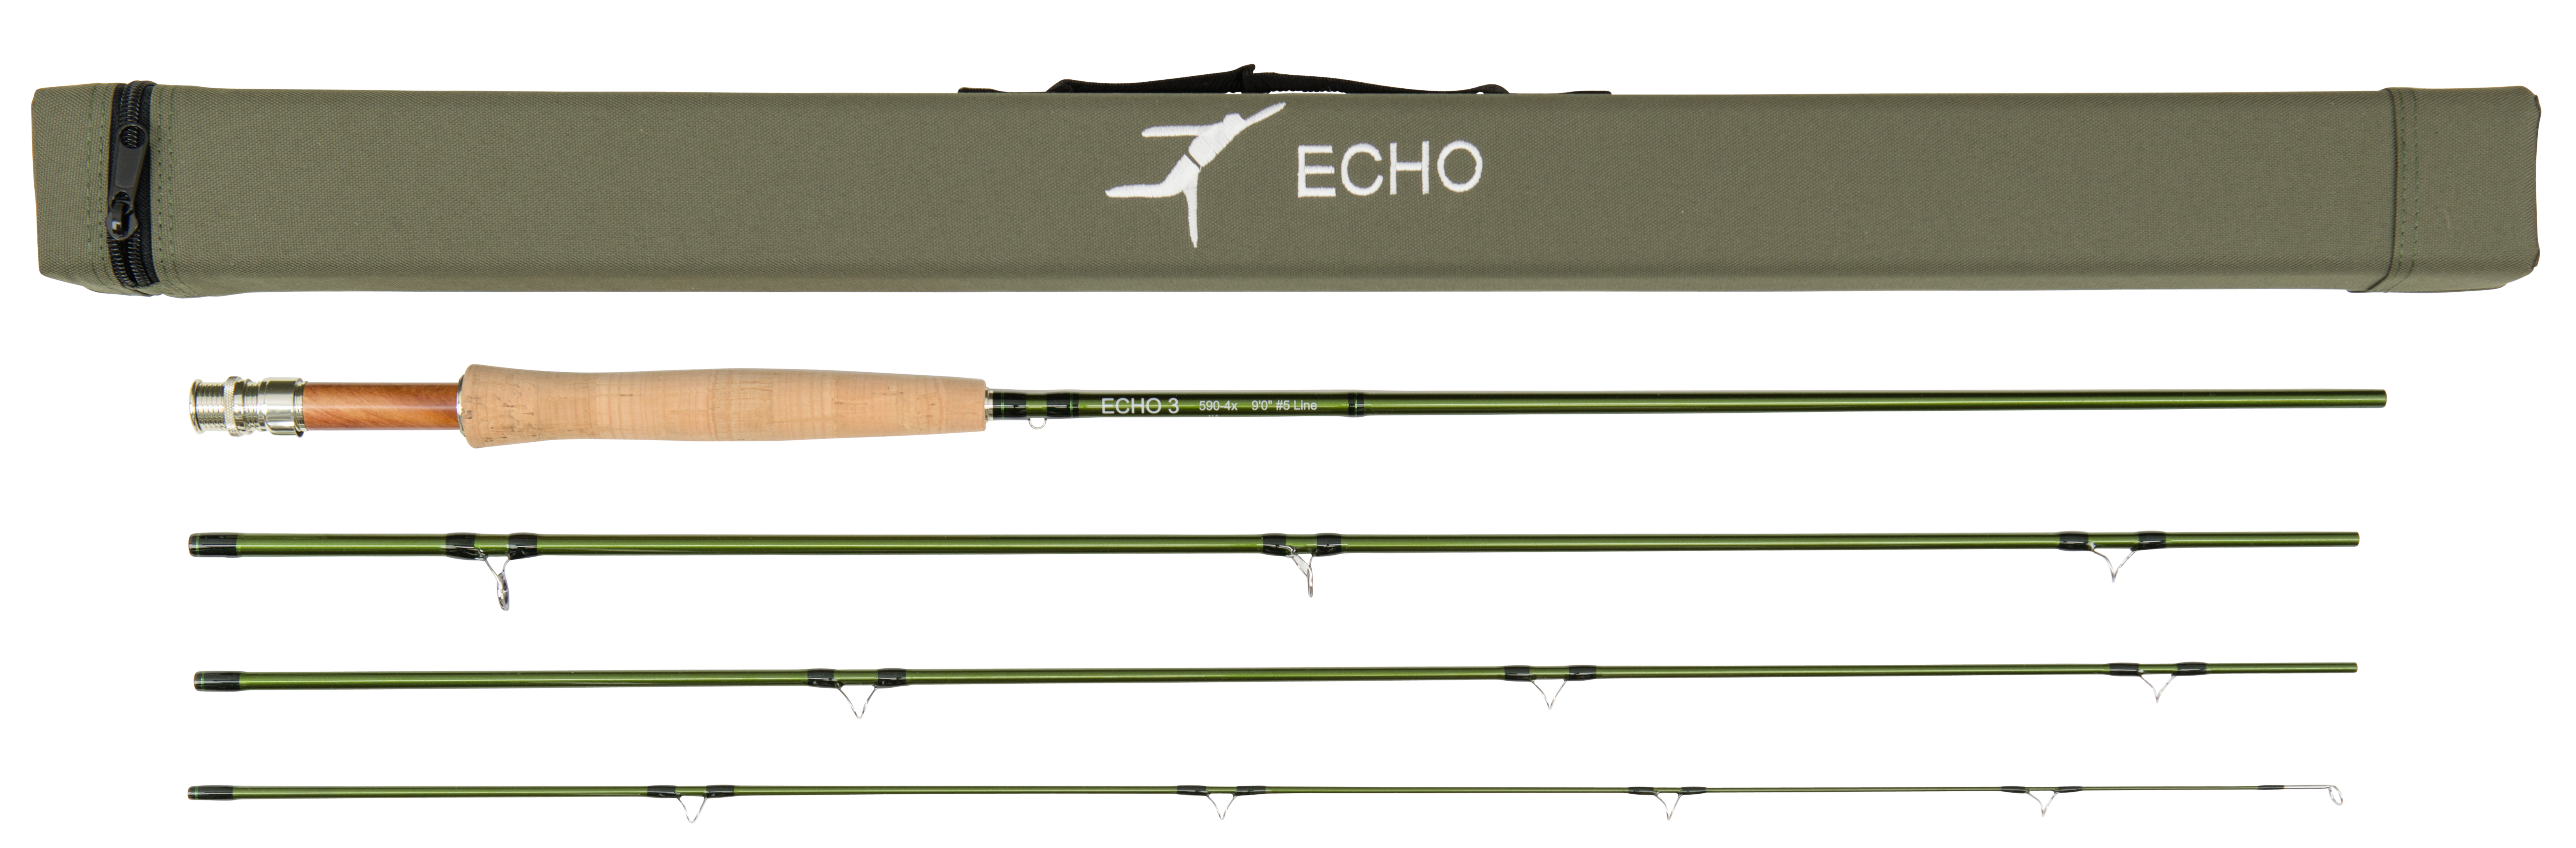 Review of Good gear from Echo Fly rods: 2016